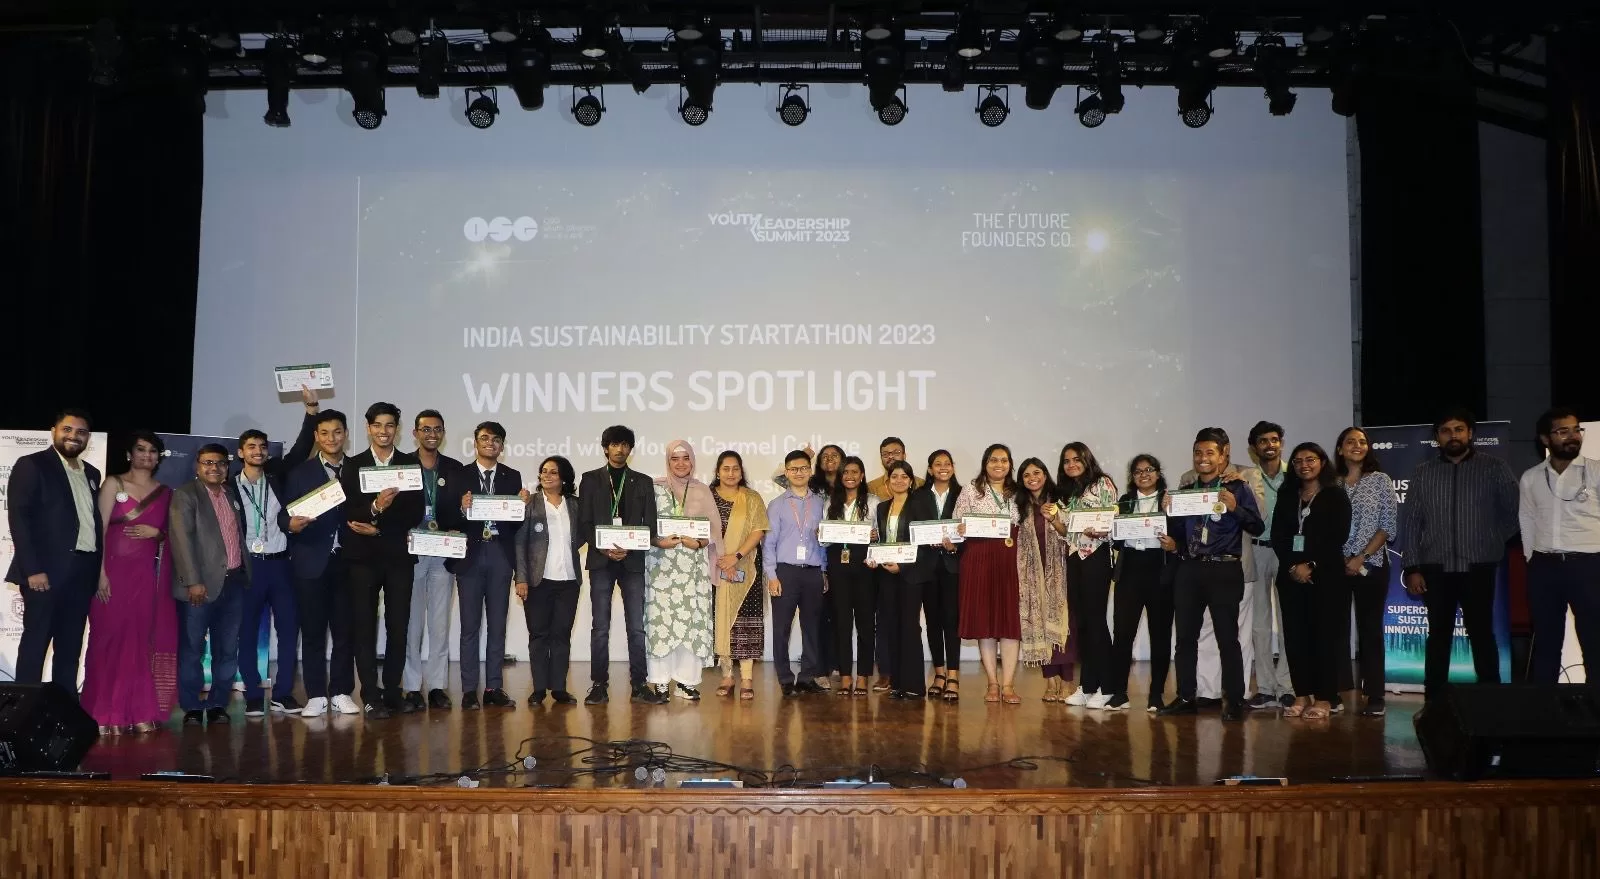 Young Sustainability Champions to Represent India at a Sustainability Leadership Summit in Singapore